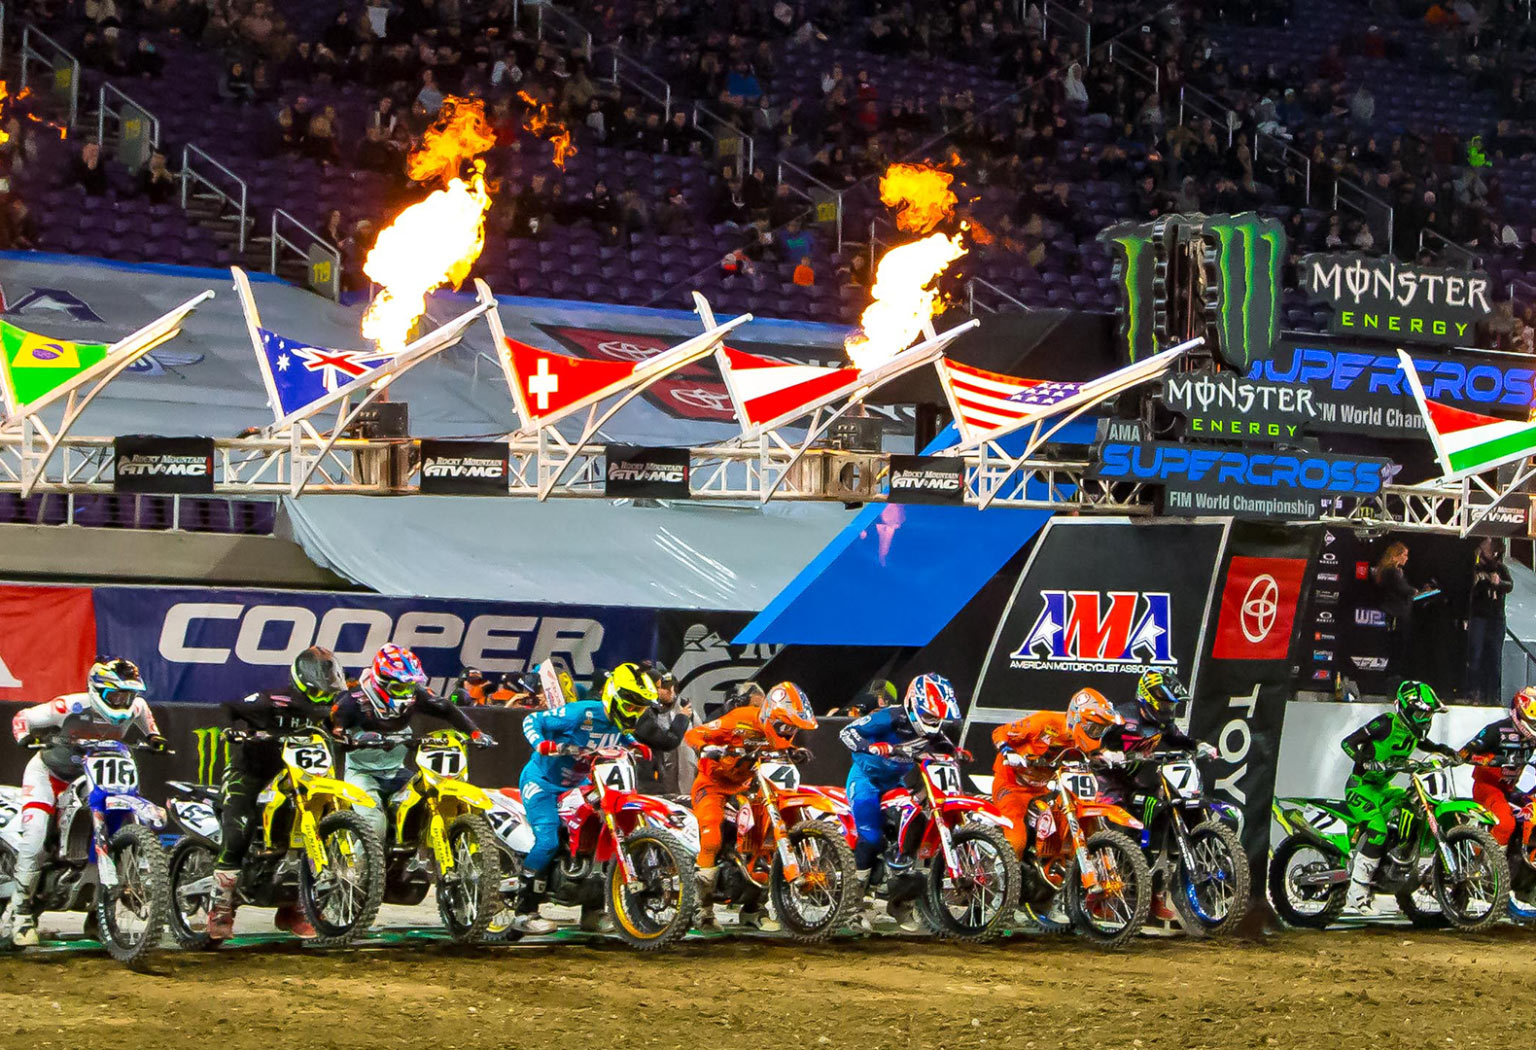 Supercross starting line full of colorful racers.